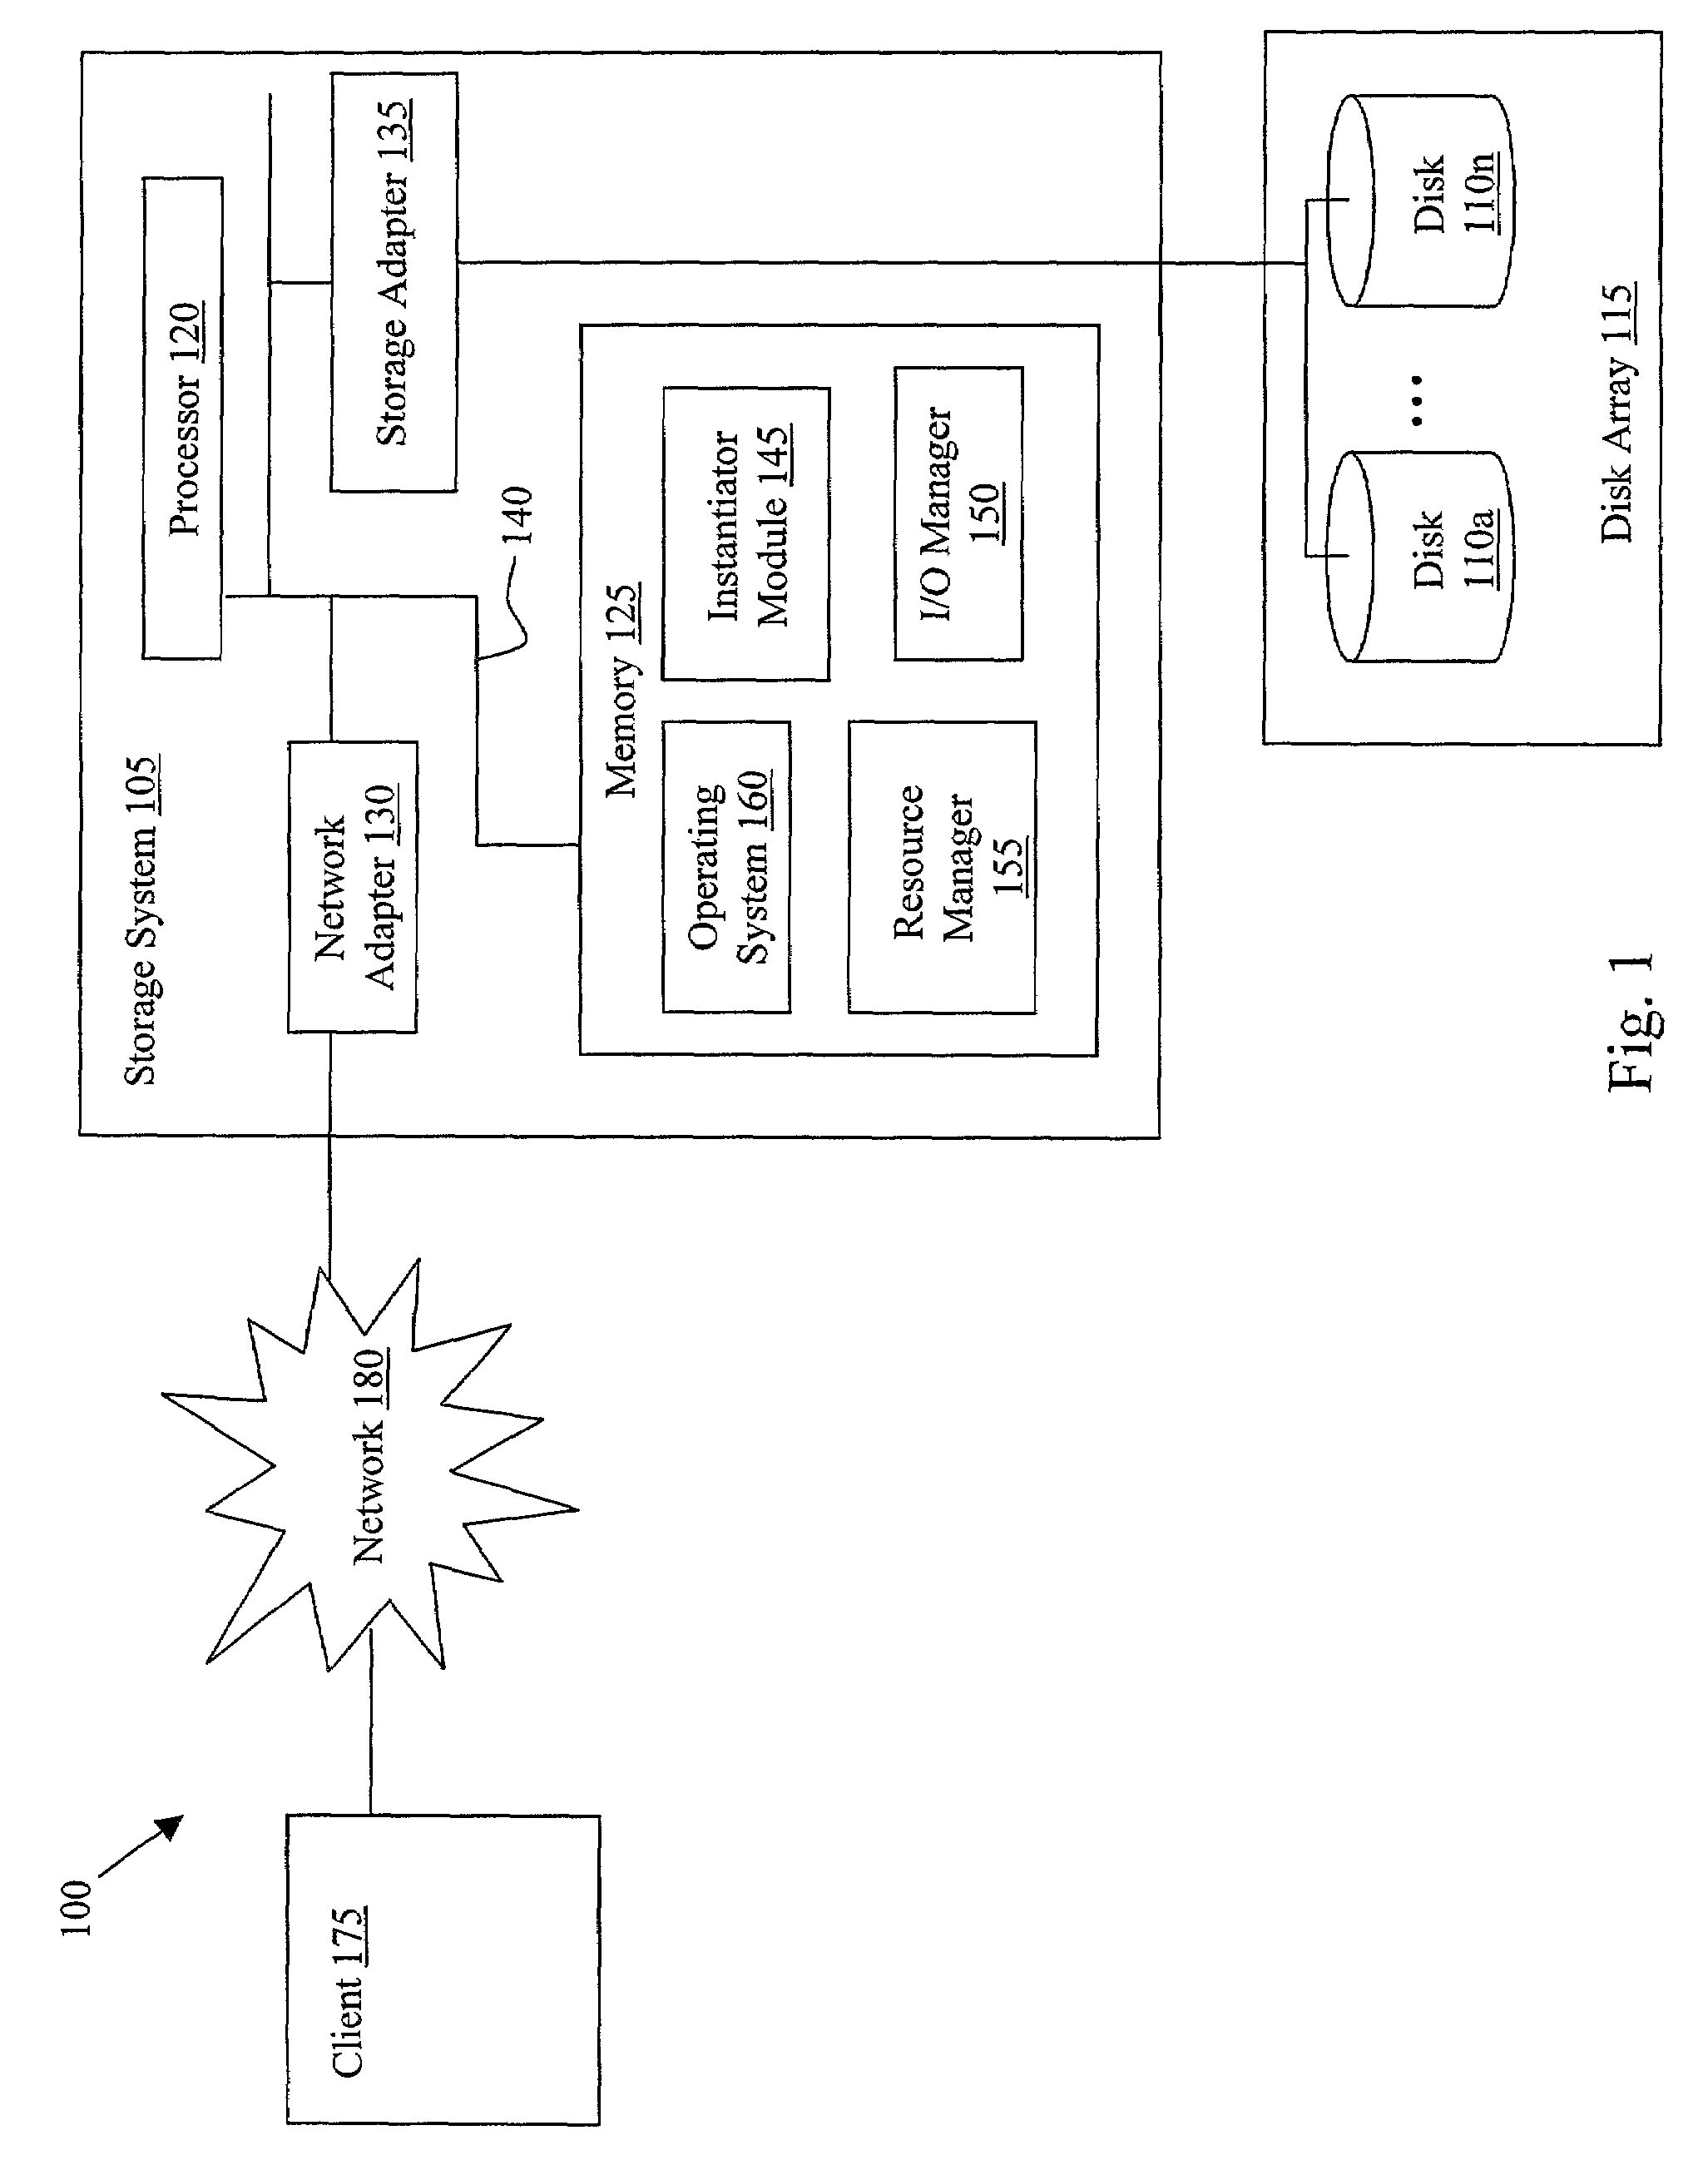 Method and apparatus for runtime resource deadlock avoidance in a raid system